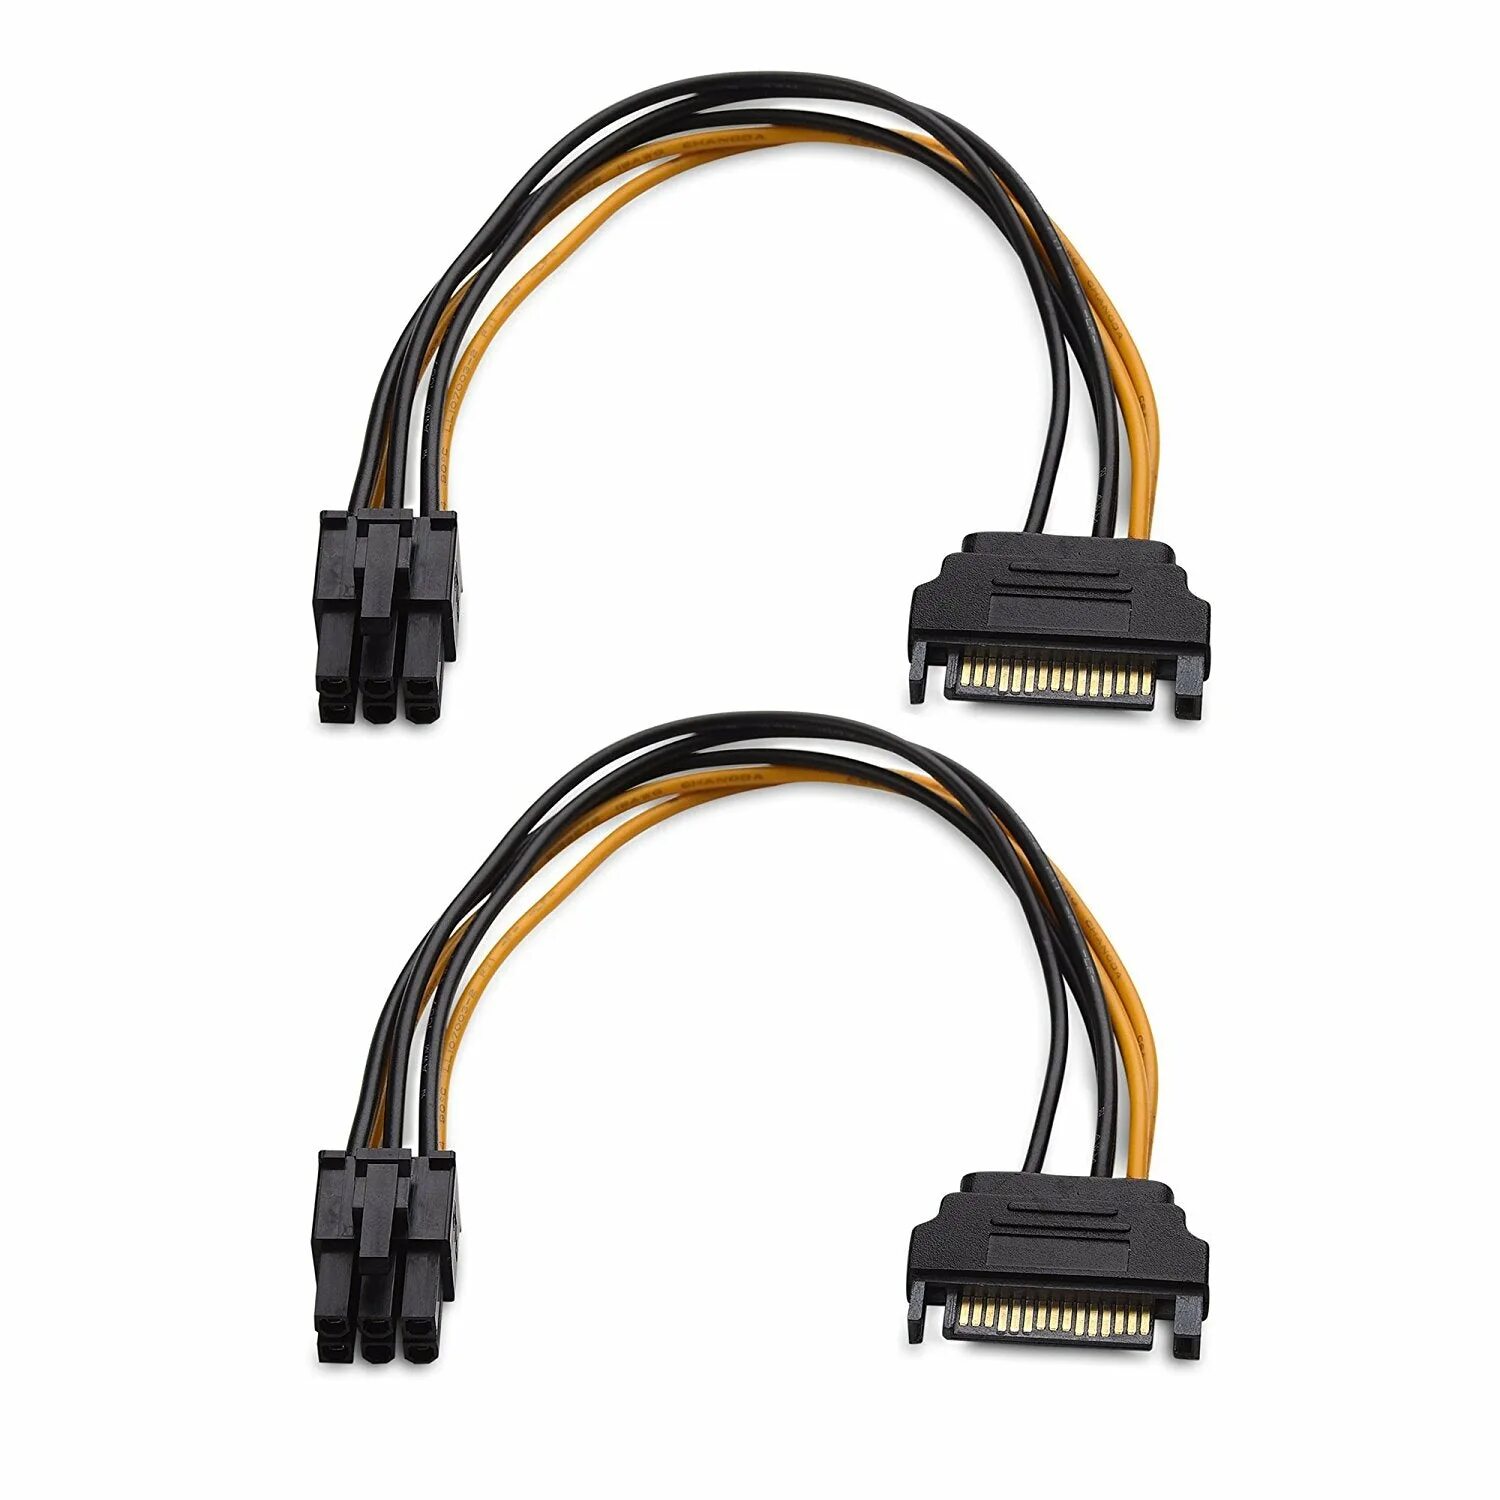 Connect the pcie power cable. Micro SATA 6pin. 6 Pin to SATA Power. 6 Pin SATA Power Cable. SATA Power 6 Pin.